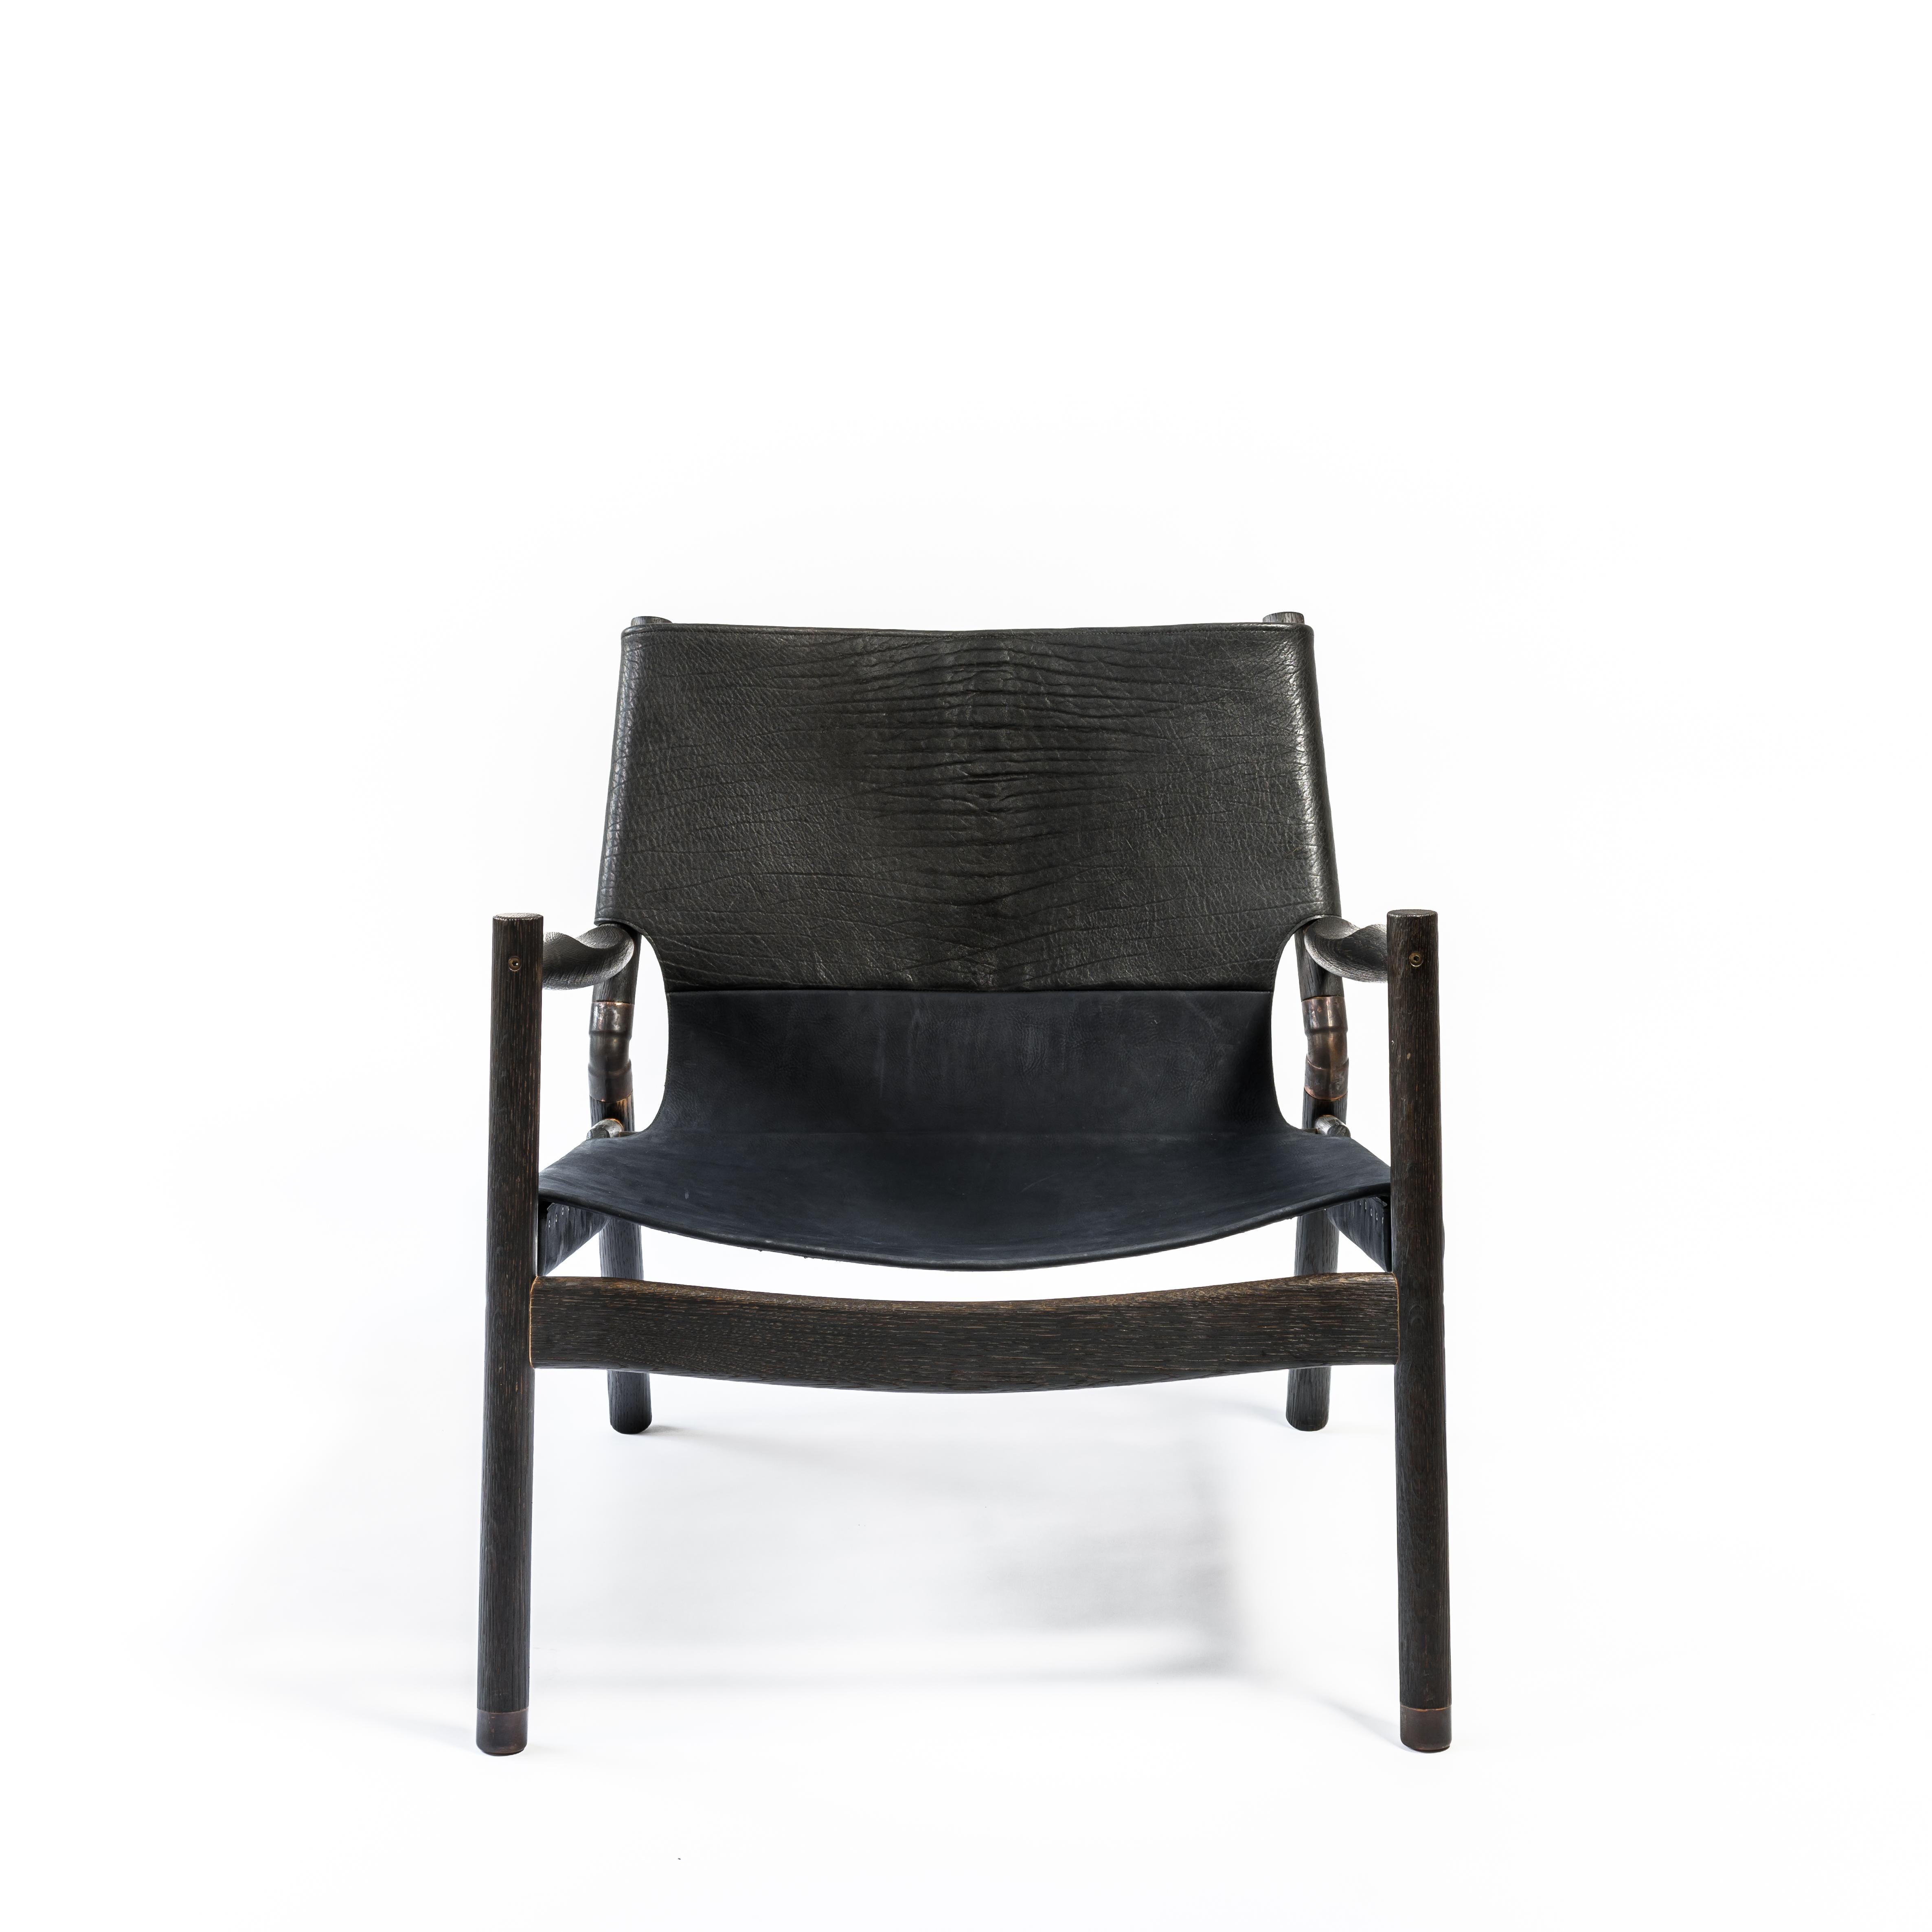 EÆ Slung leather lounge chair in shrunken Bison/ Navy nubuck leather with charred Oak frame. 
Reimagining the classic lounge chair first popularized by midcentury icons Hans Wegner and Charles and Ray Eames, designer Ben Erickson of Erickson